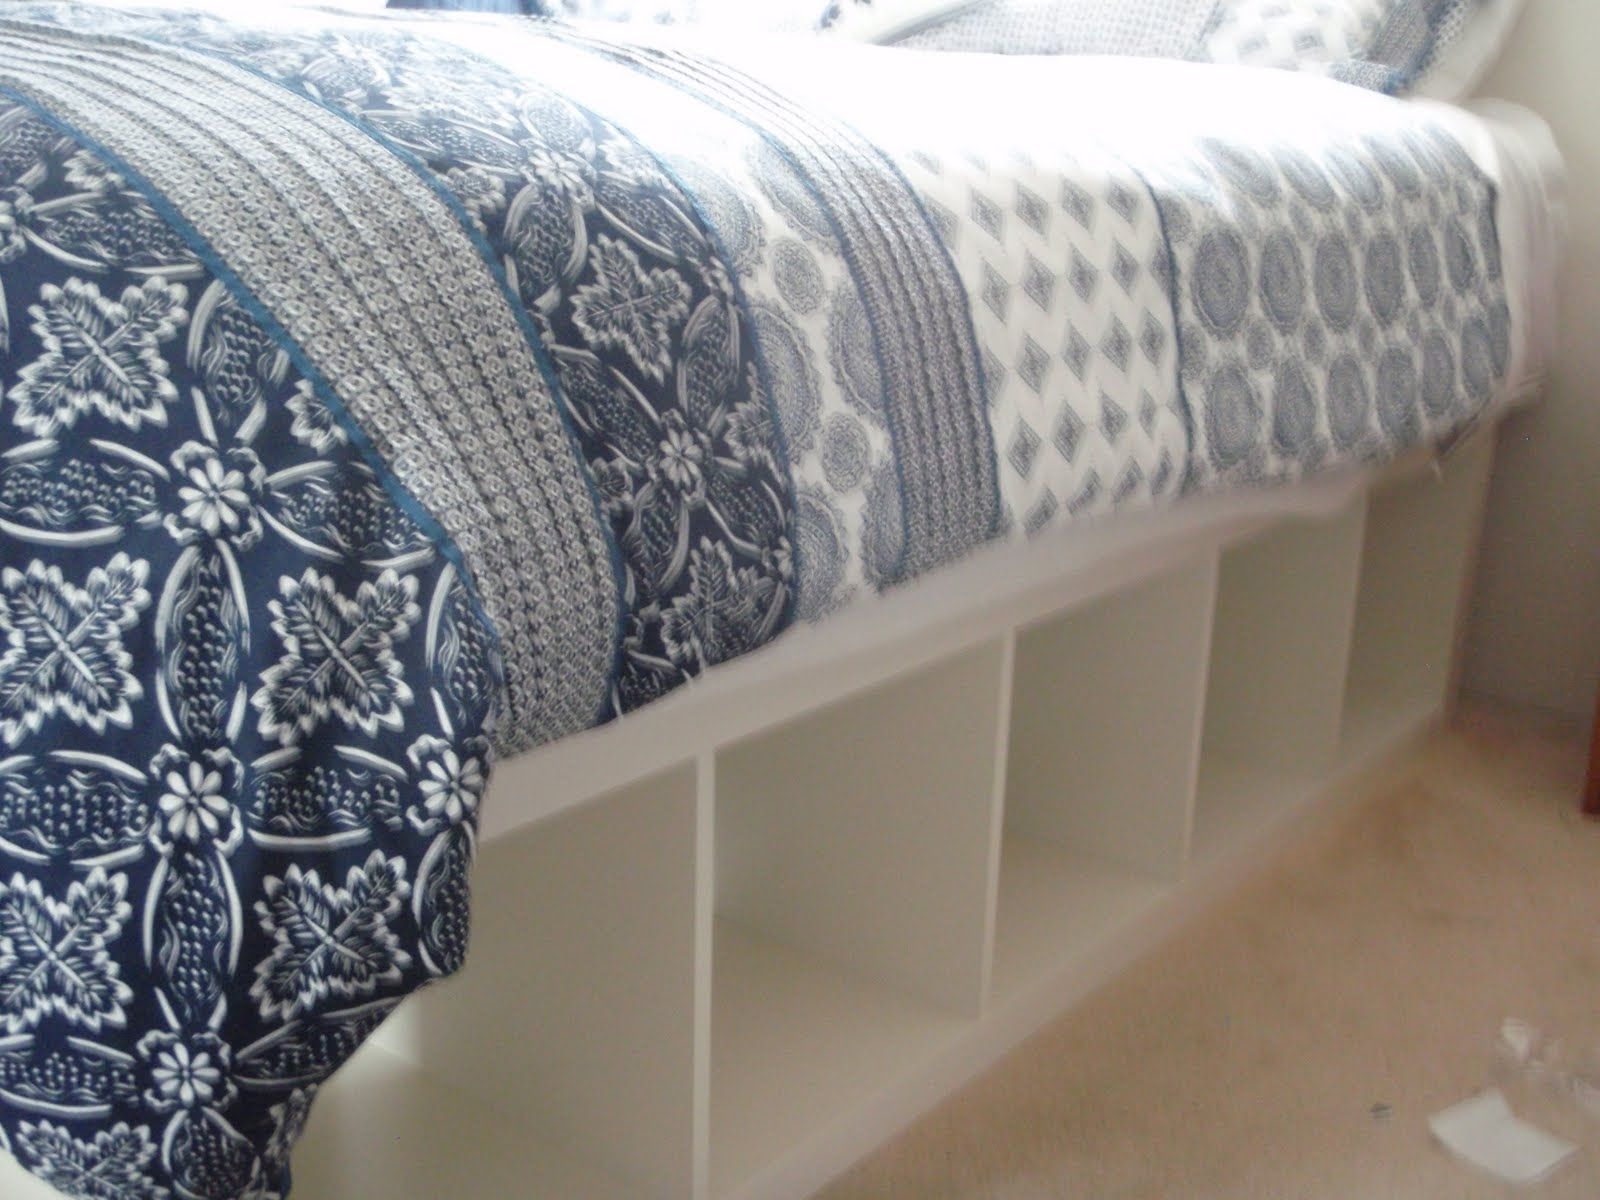 2017 Expedit Re Purposed As Bed Frame For Maximum Storage (View 13 of 15)